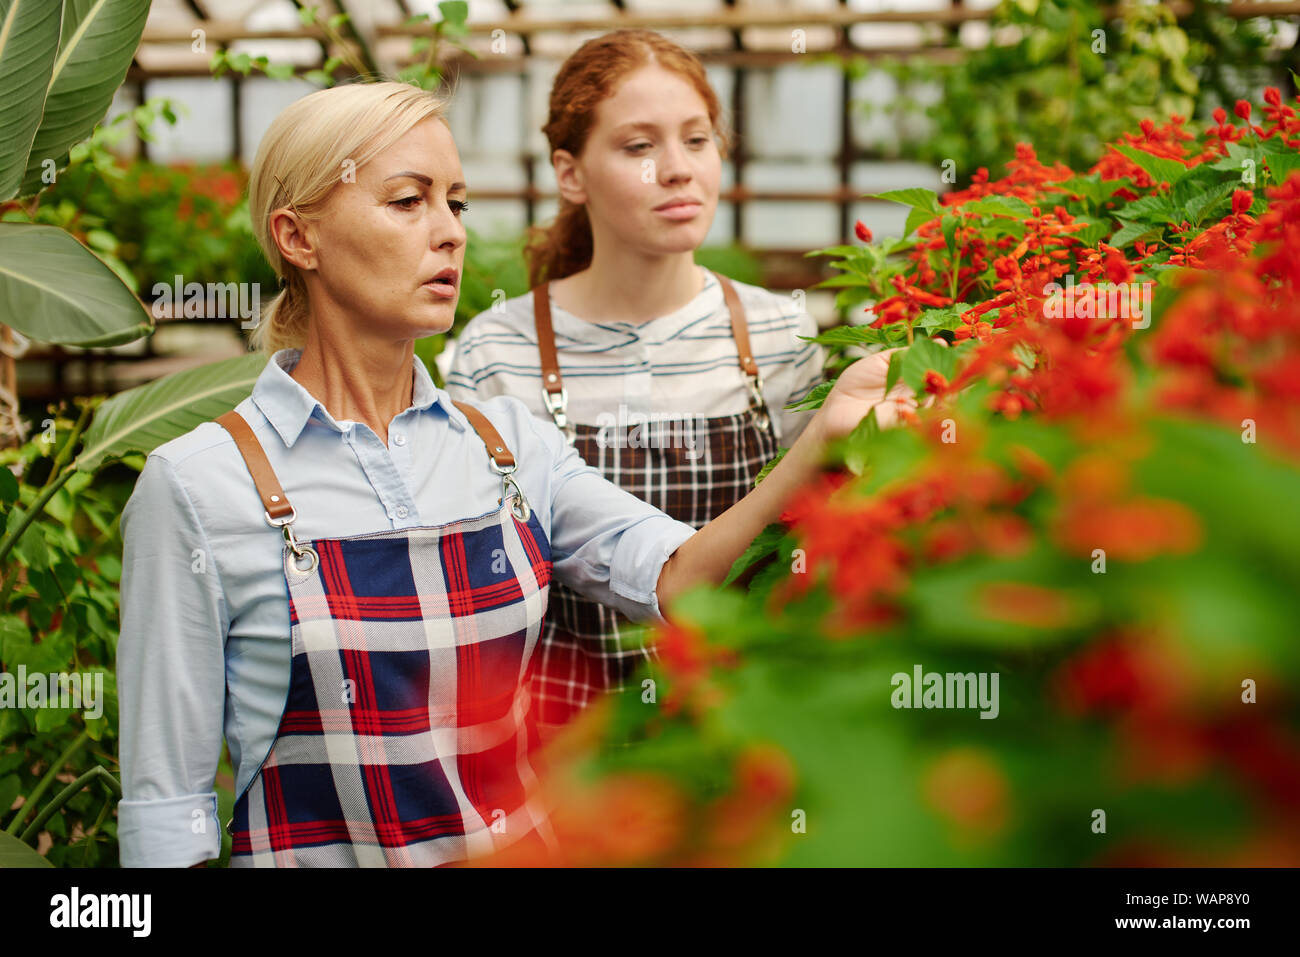 Two gardeners look at the plants they grow to sell in the greenhouse. Stock Photo